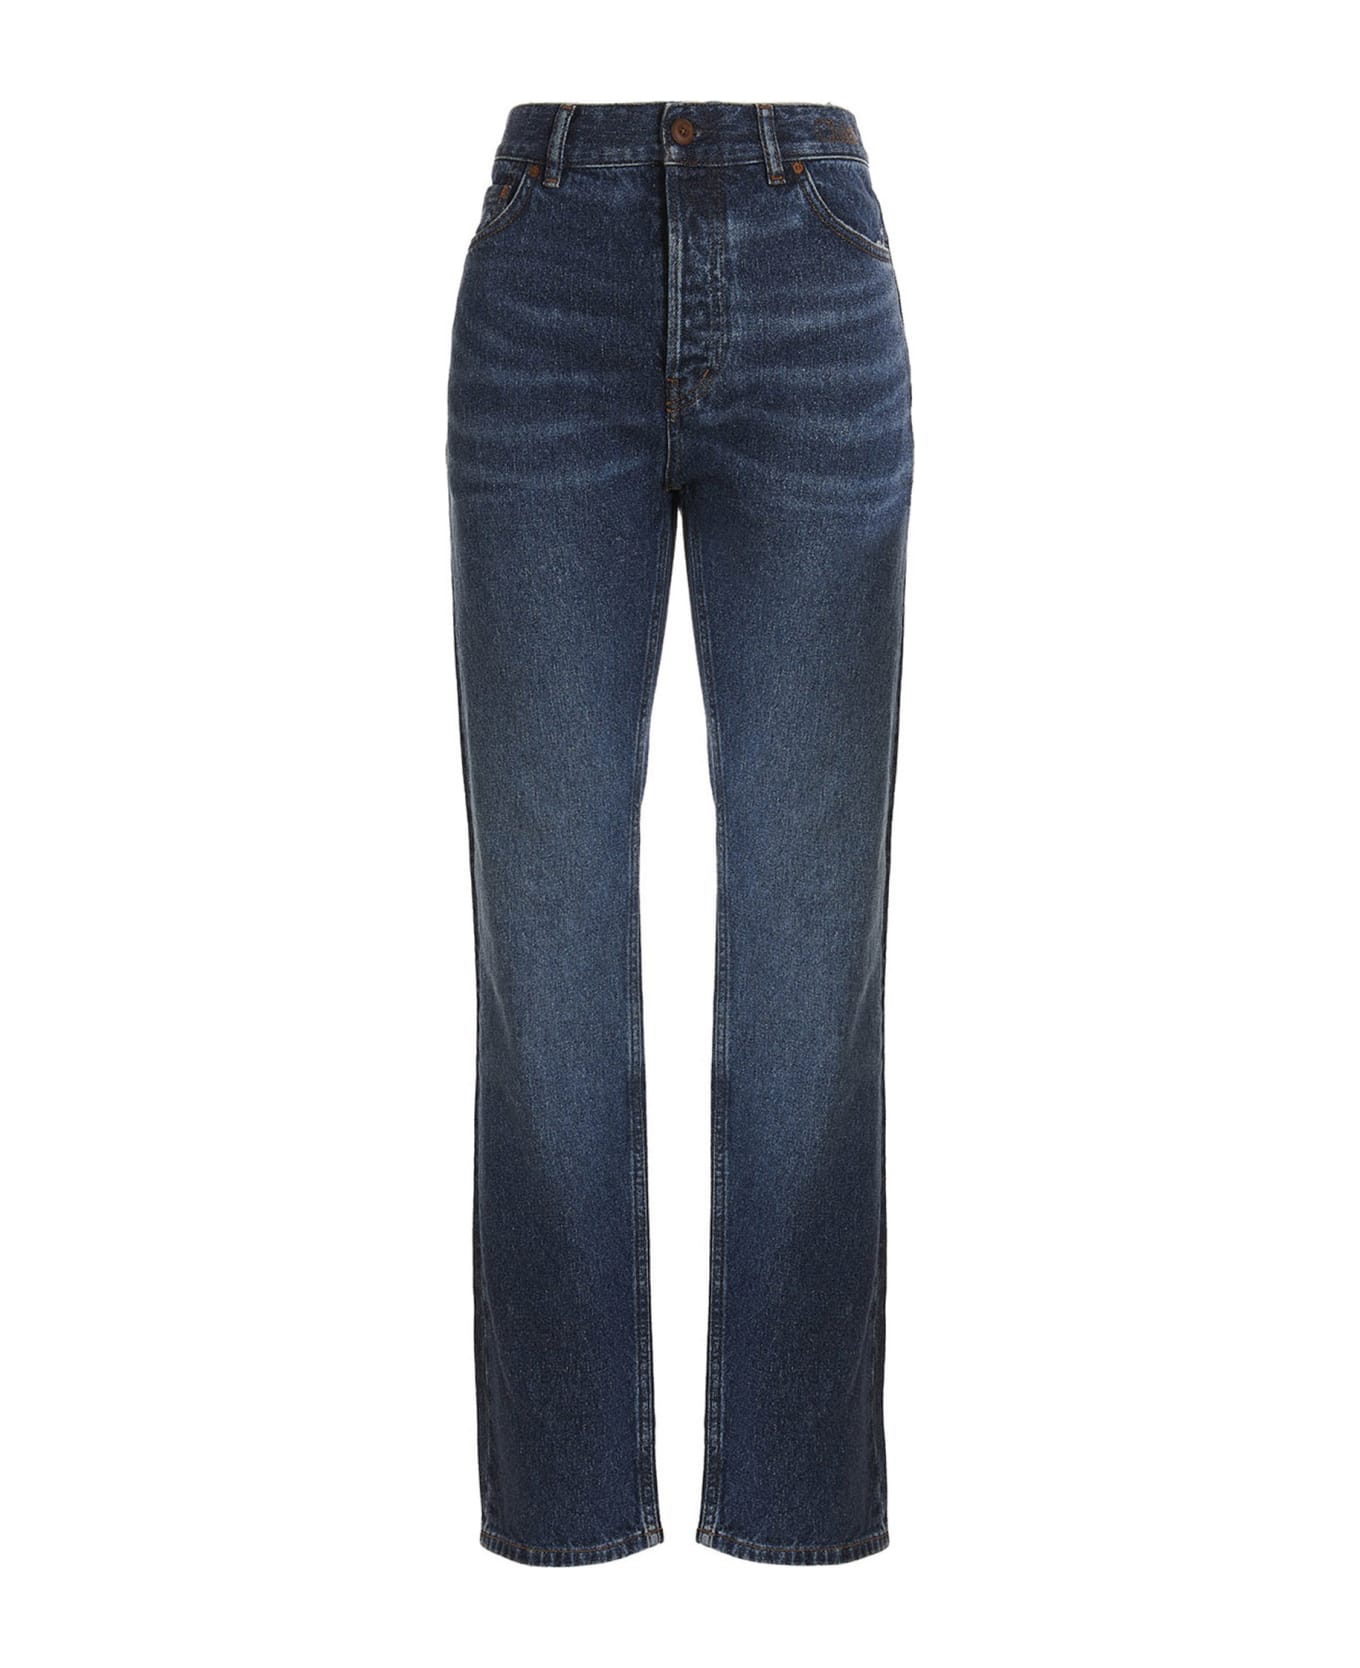 Chloé Embroidered Logo Jeans - Blue デニム